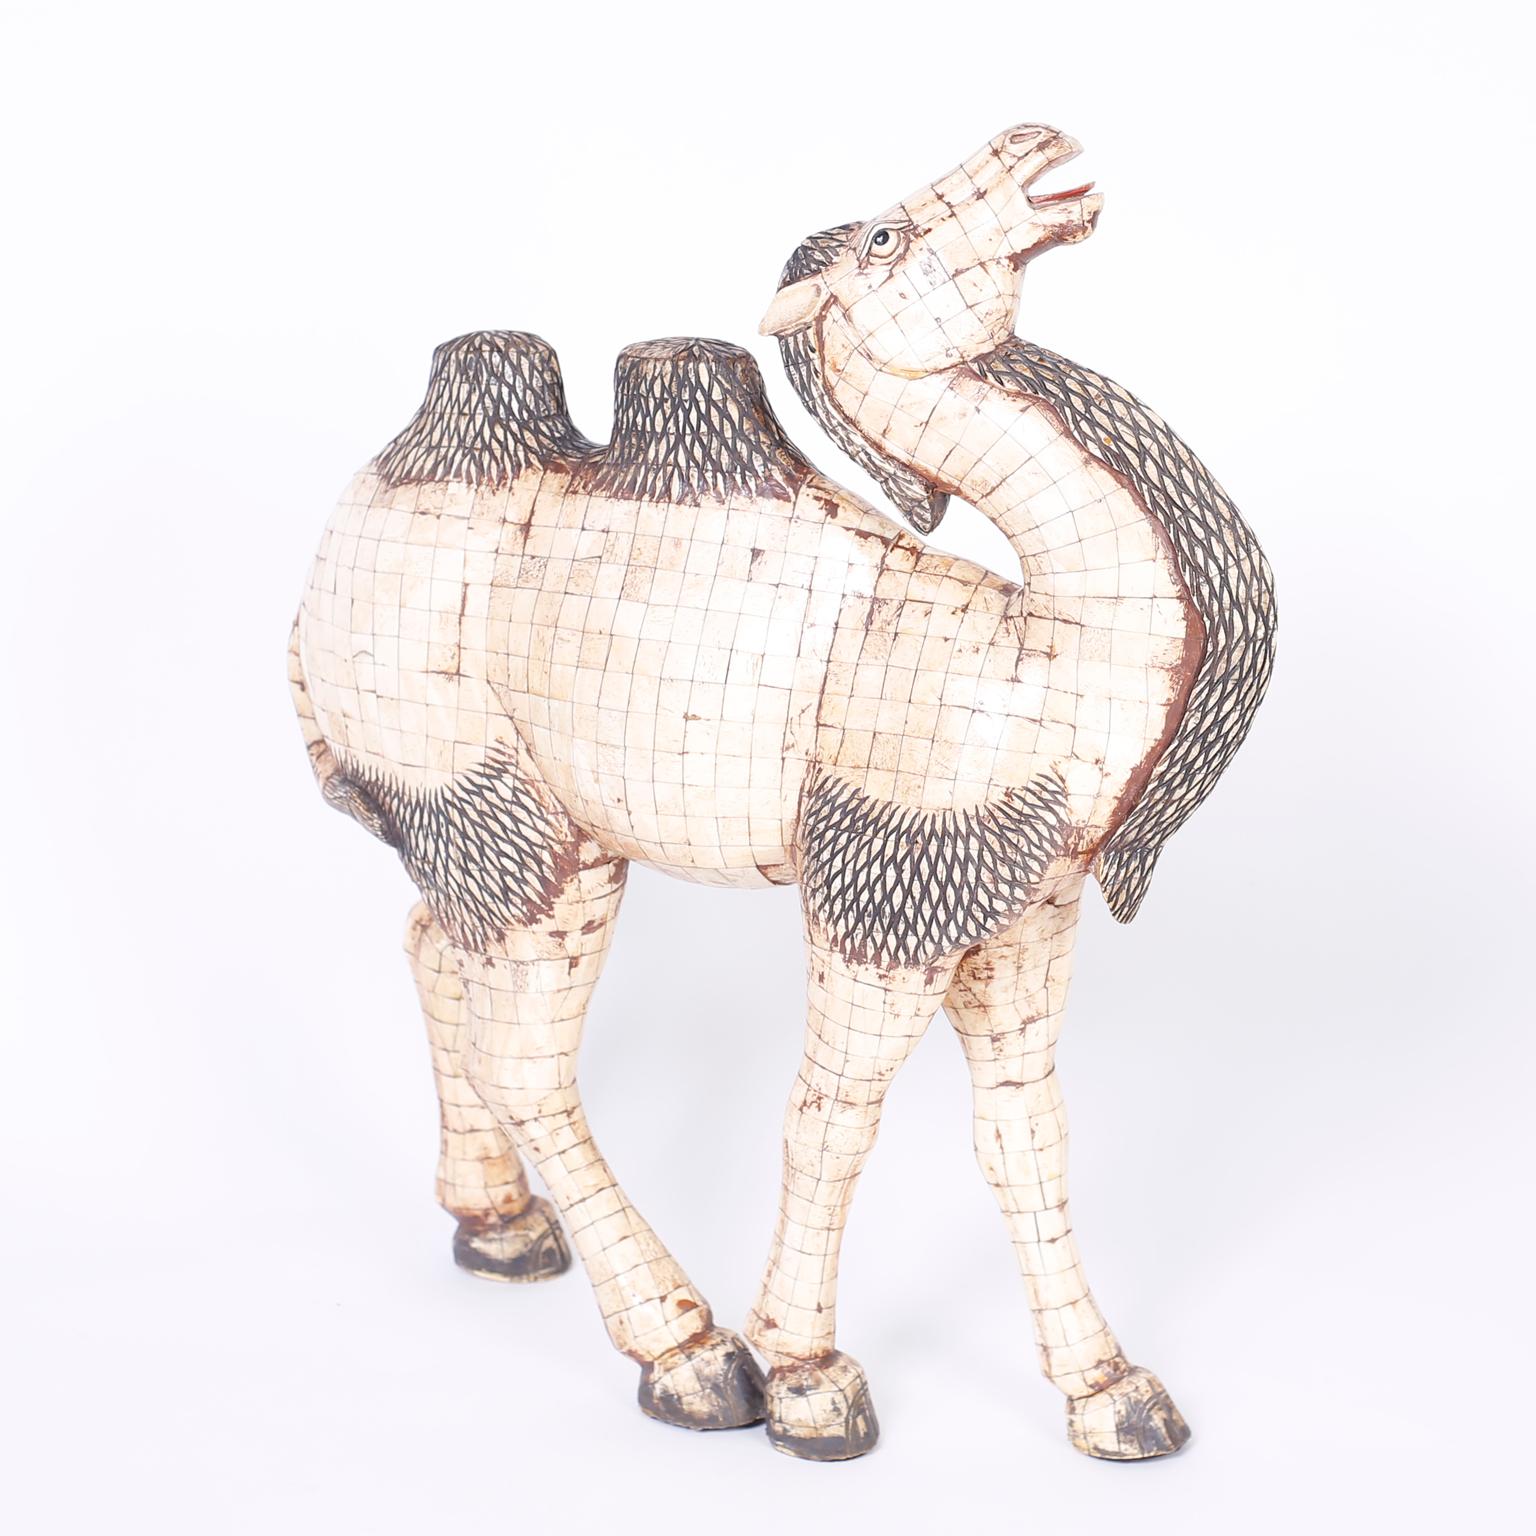 Impressive Chinese stylized camel caught in a whimsical pose crafted in tessellated bone veneer and carved bone over carved wood.